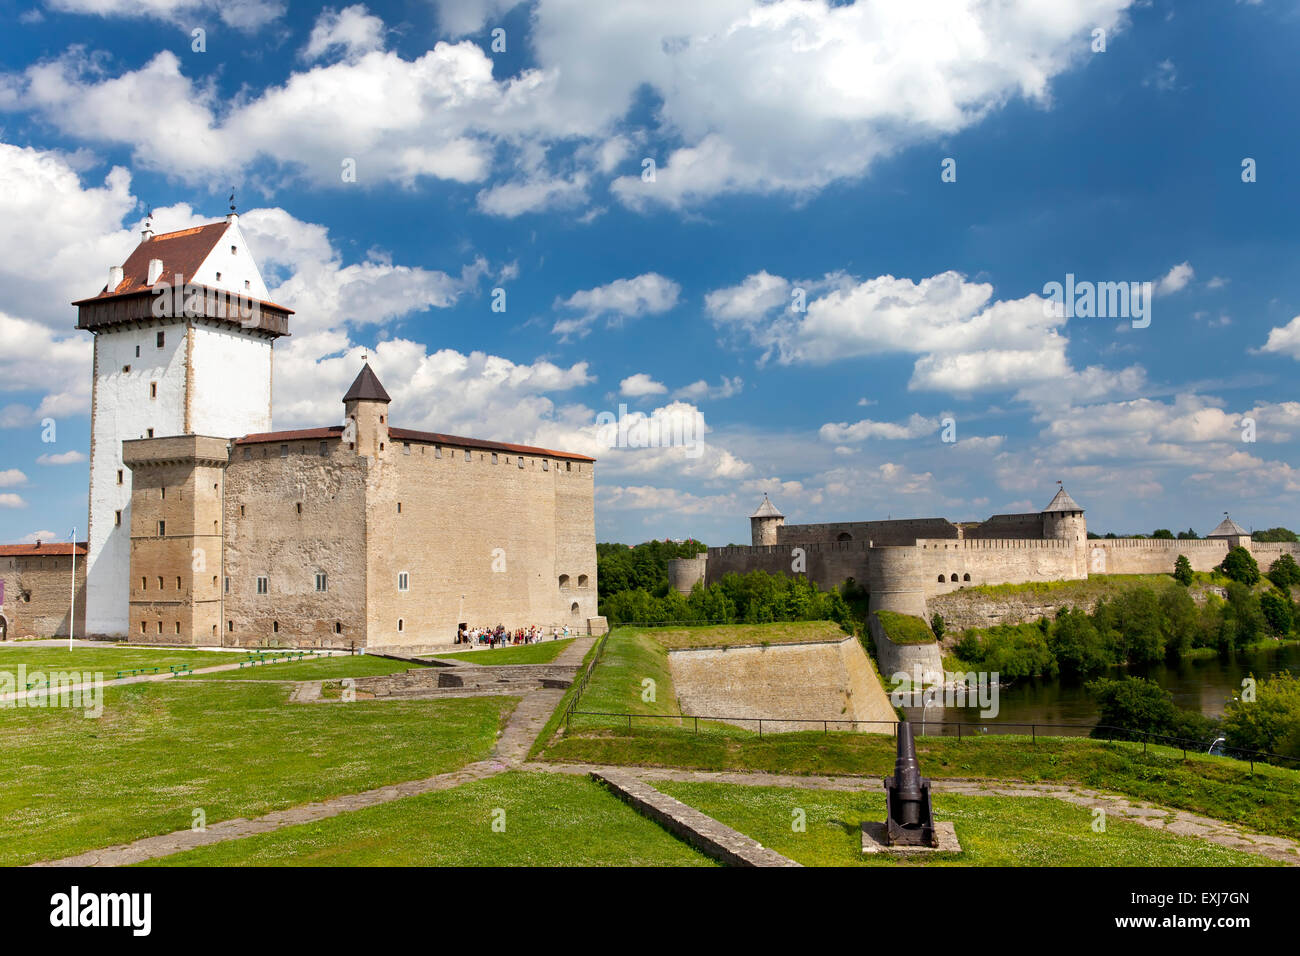 Two ancient fortresses on the parties from the river which is border. Narva, Estonia and Ivangorod behind the river, Russia. Stock Photo